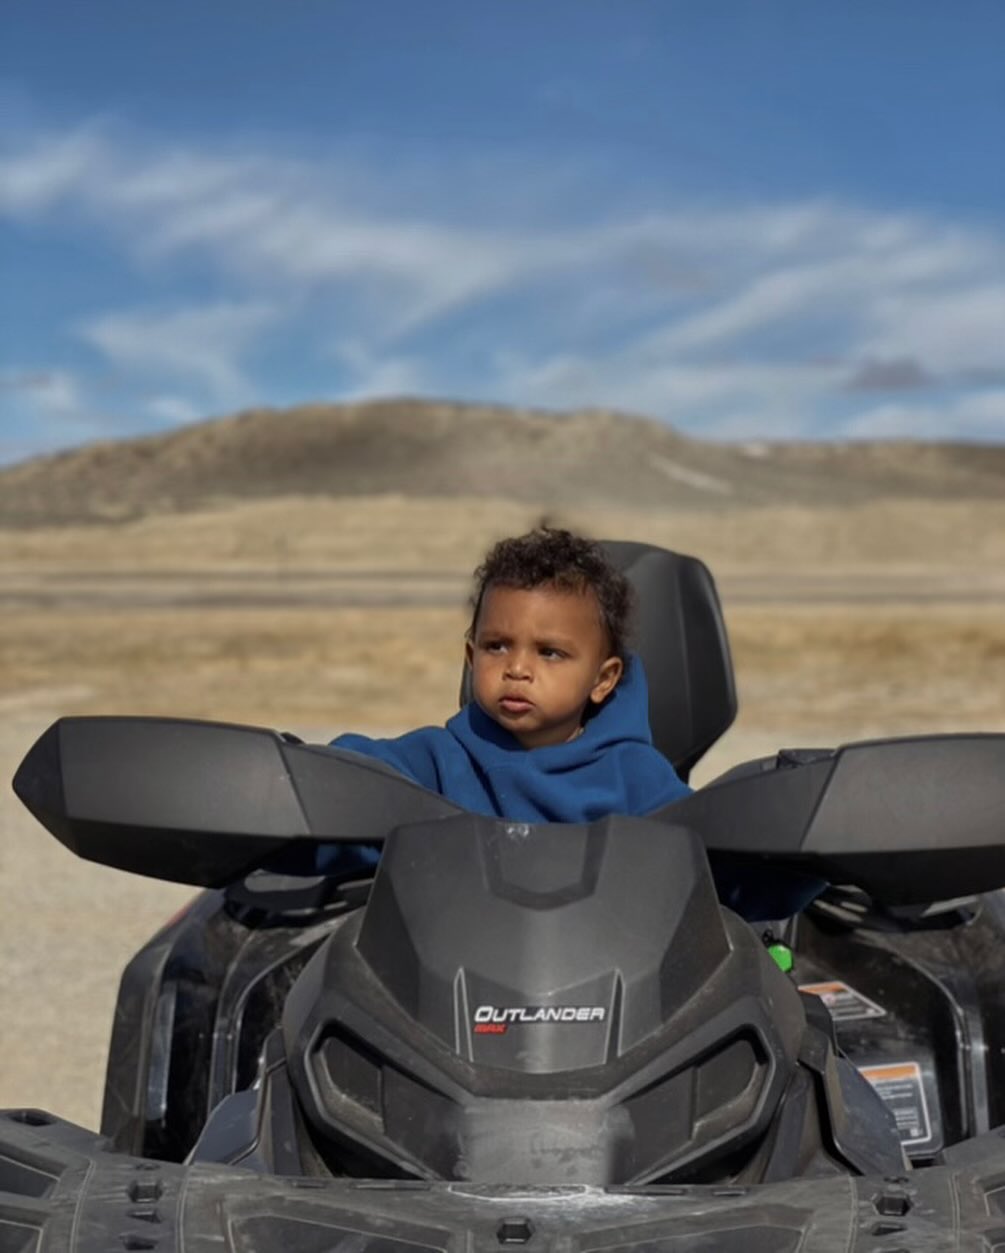 Kim captured Psalm sitting alone in an ATV at the Wyoming ranch she once shared with ex-husband Kanye West